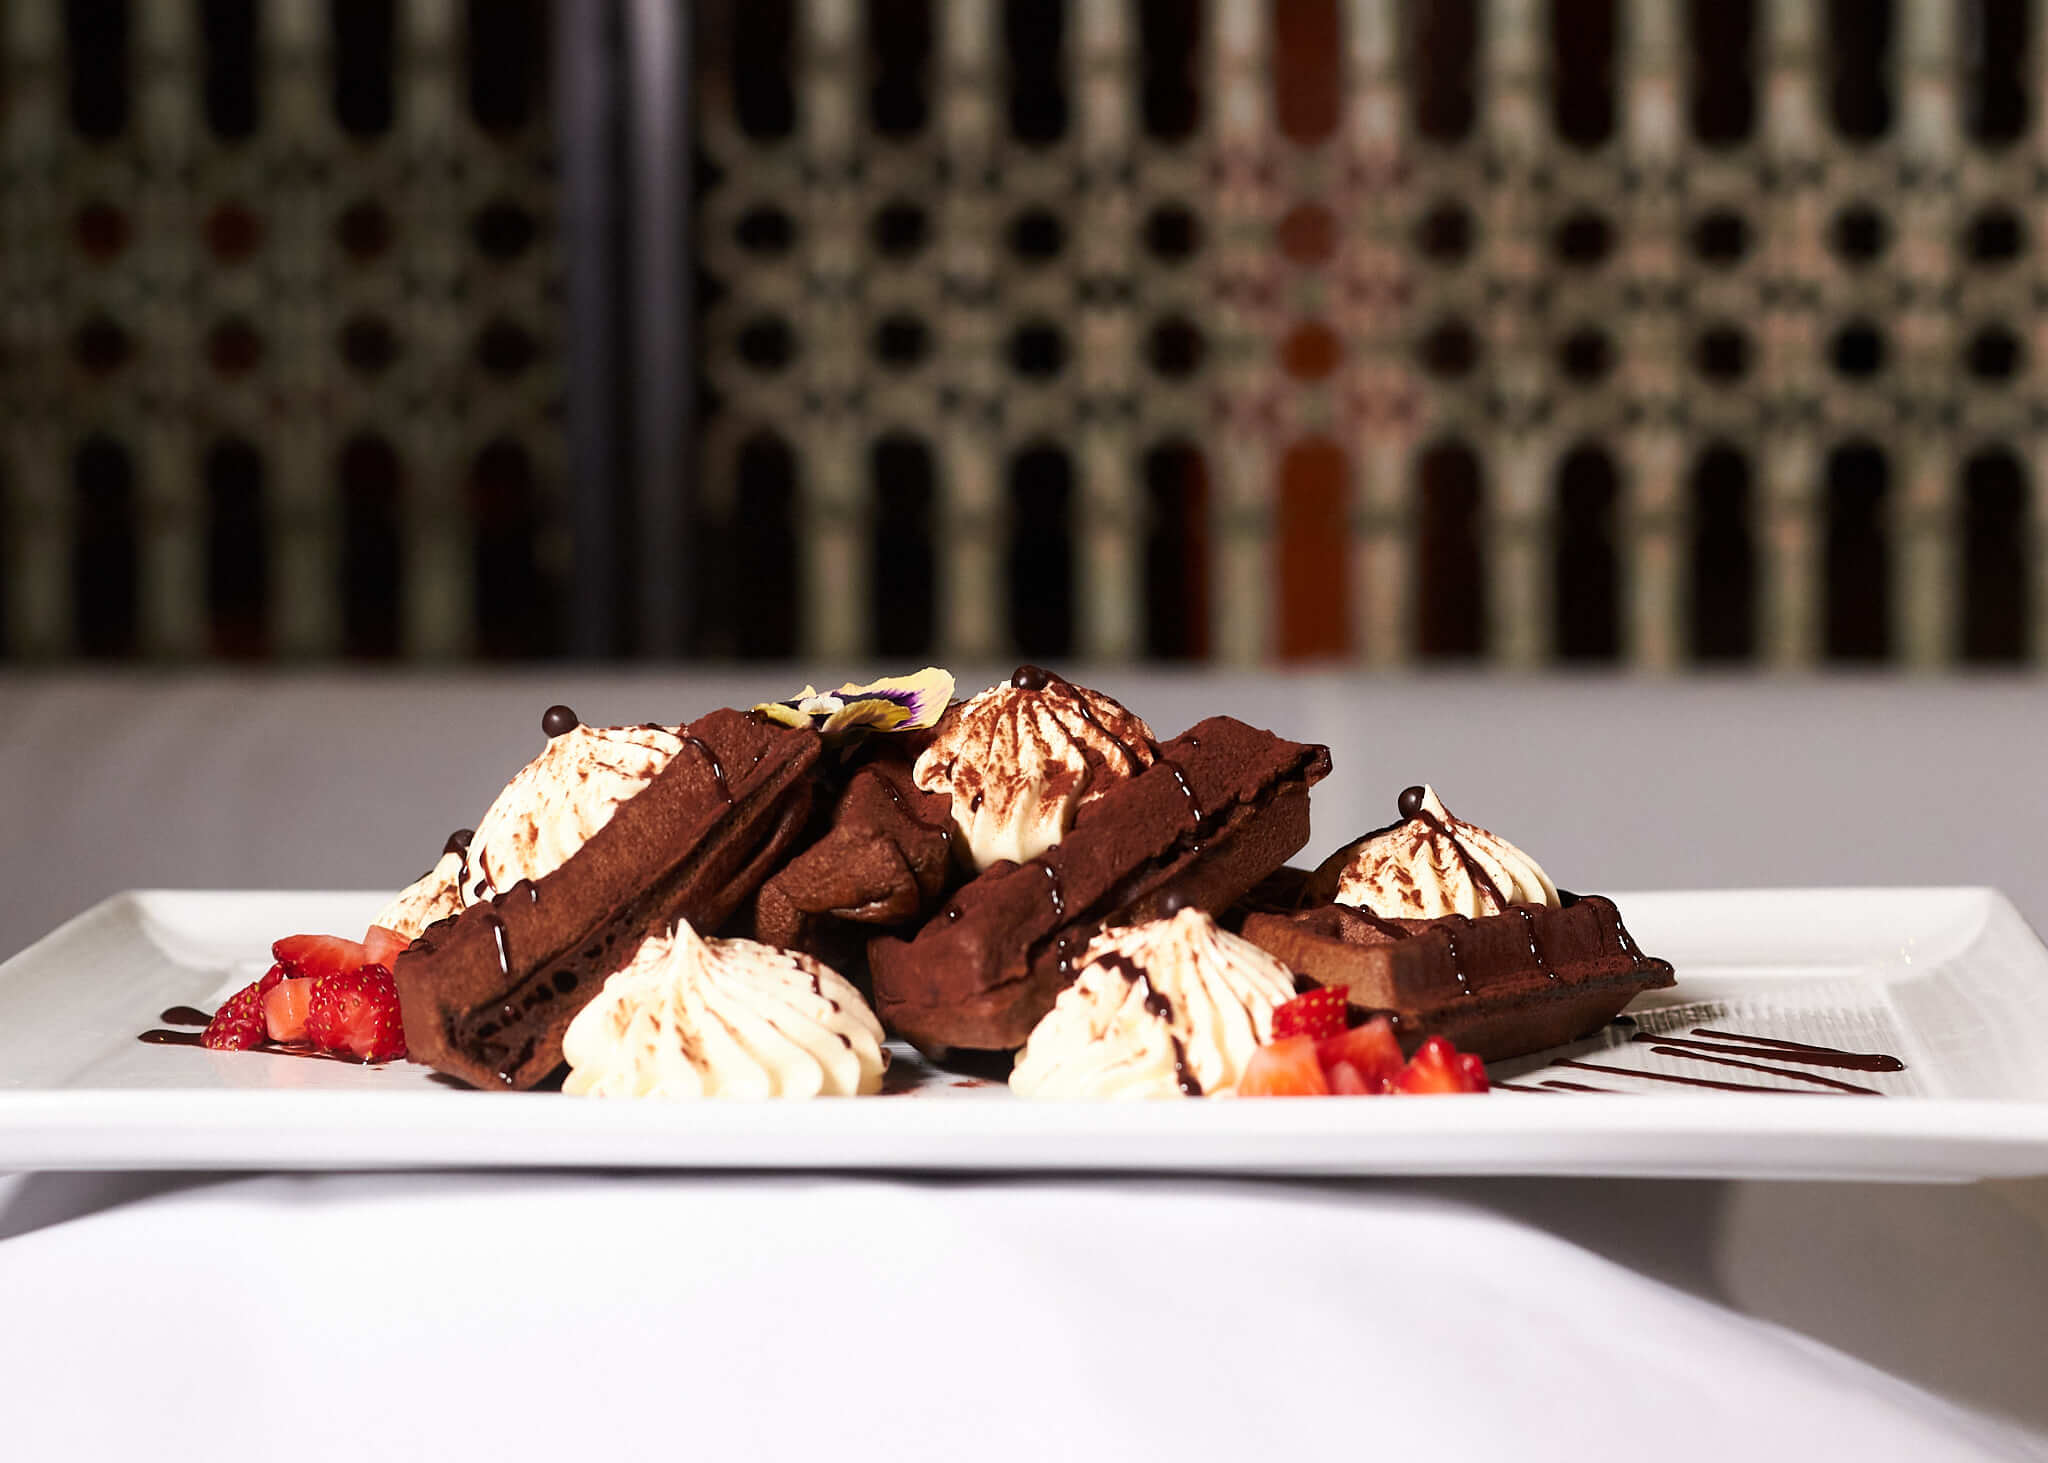 LAVO Las Vegas - Chocolate Waffles with Whipped Cream and Strawberries